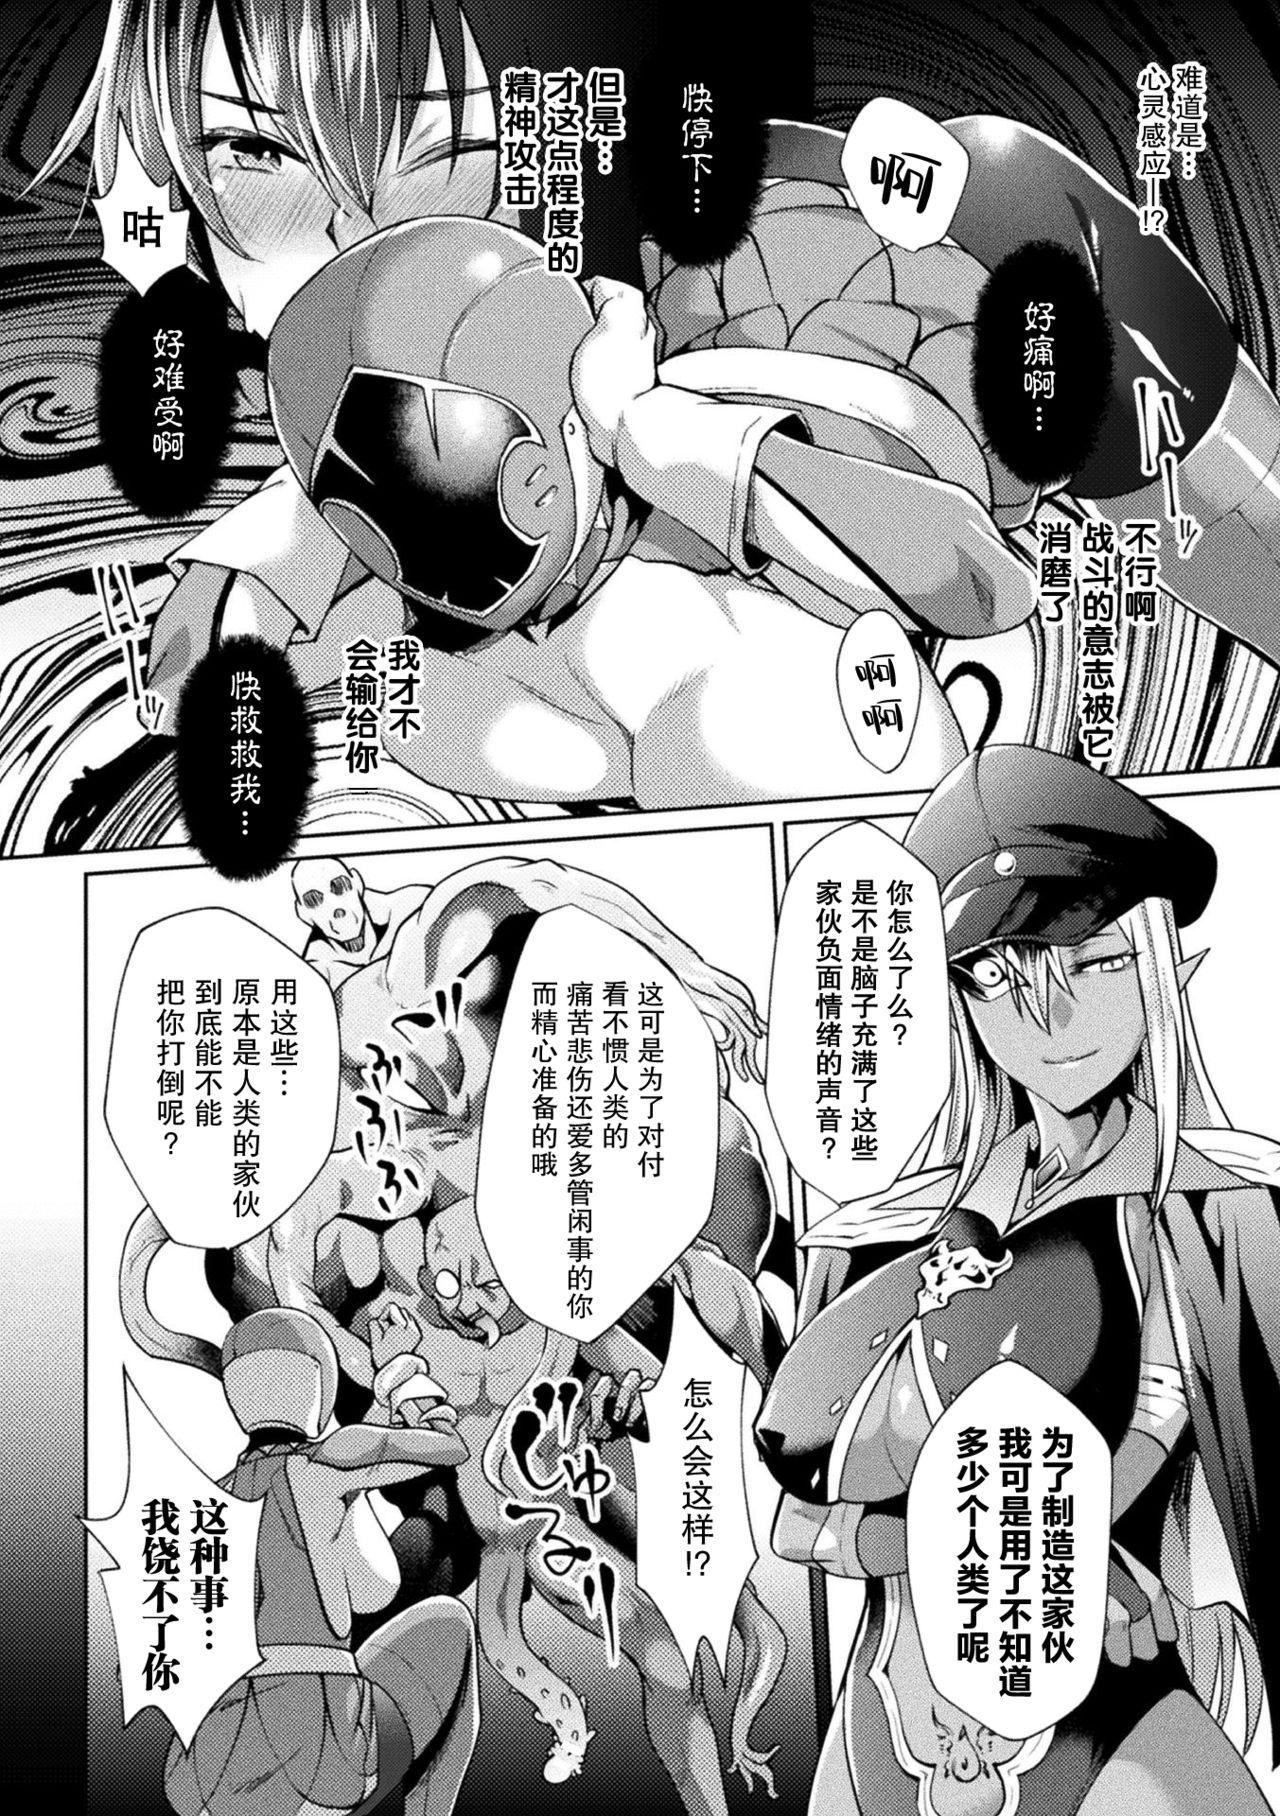 Passionate Scatterd Flower - Super sentai Gorgeous - Page 5